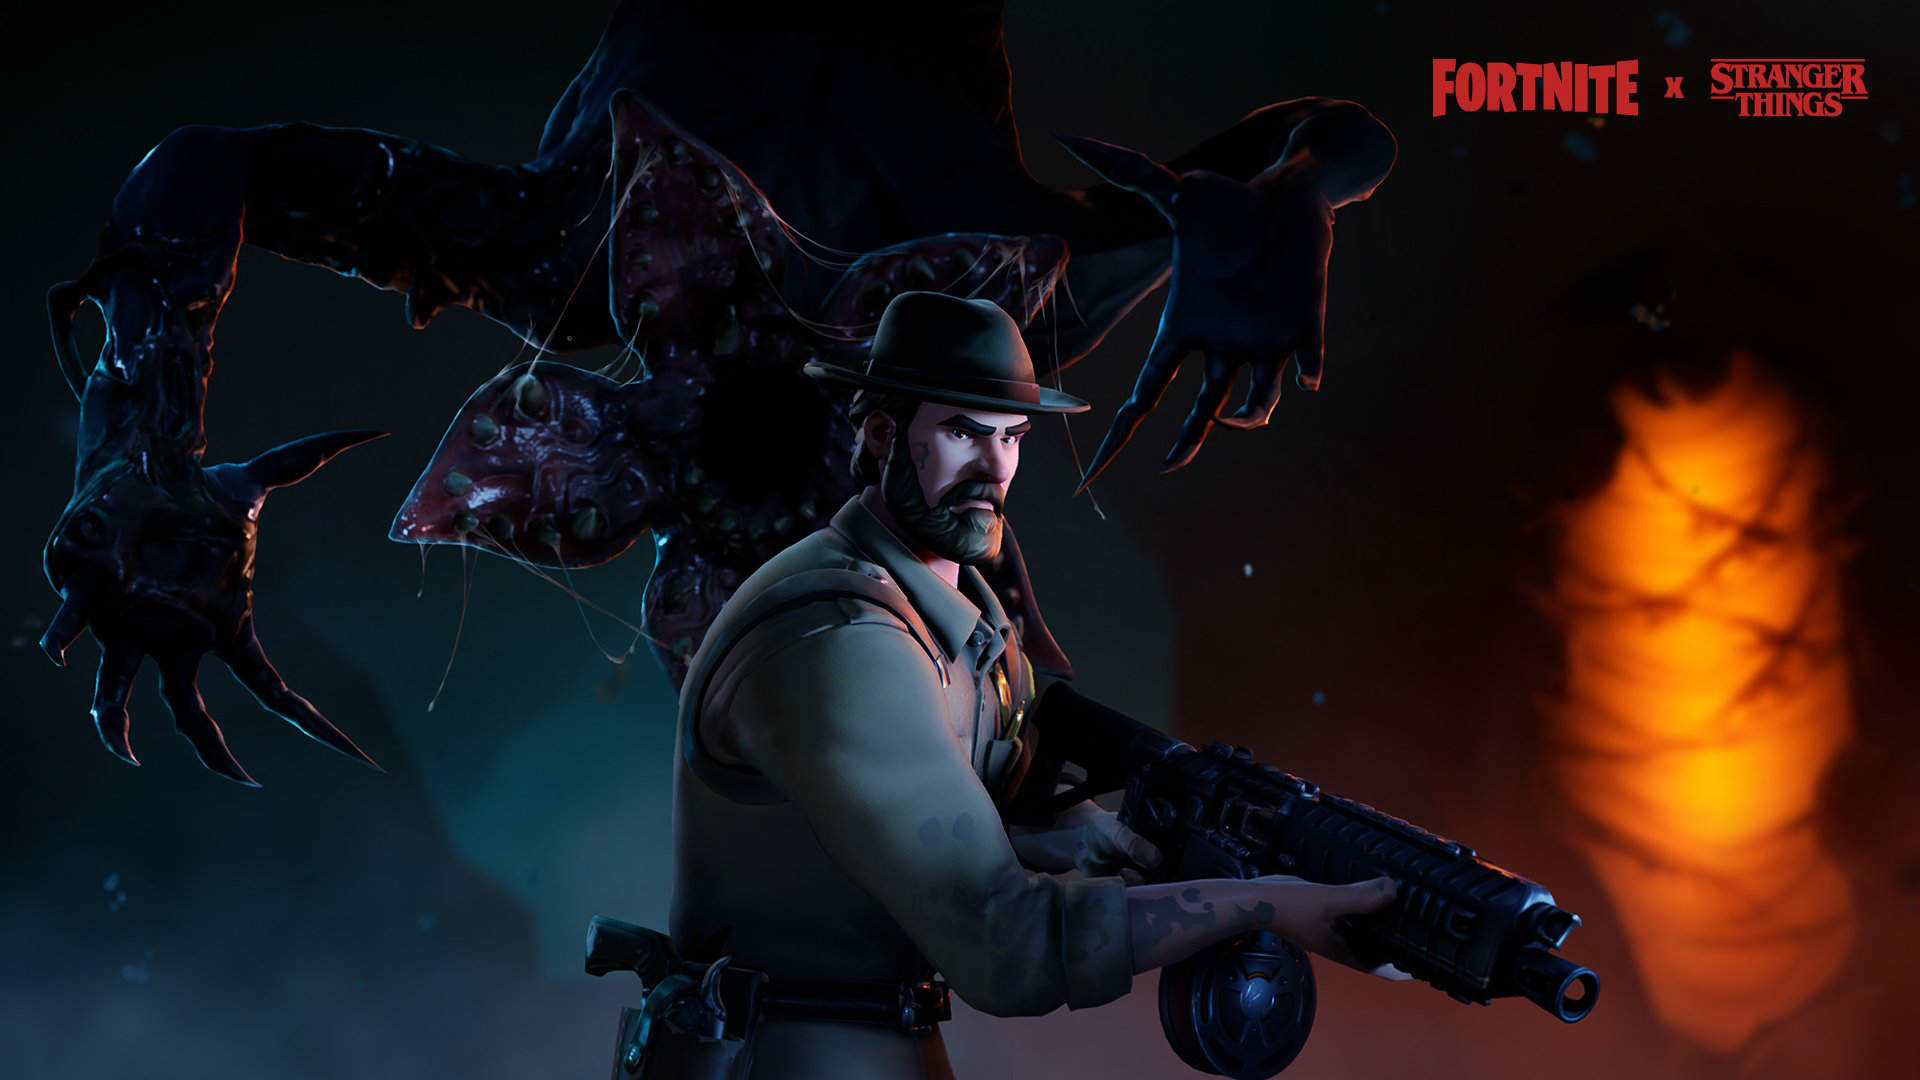 Fortnite expands Stranger Things tie in with skins and wraps 1920x1080